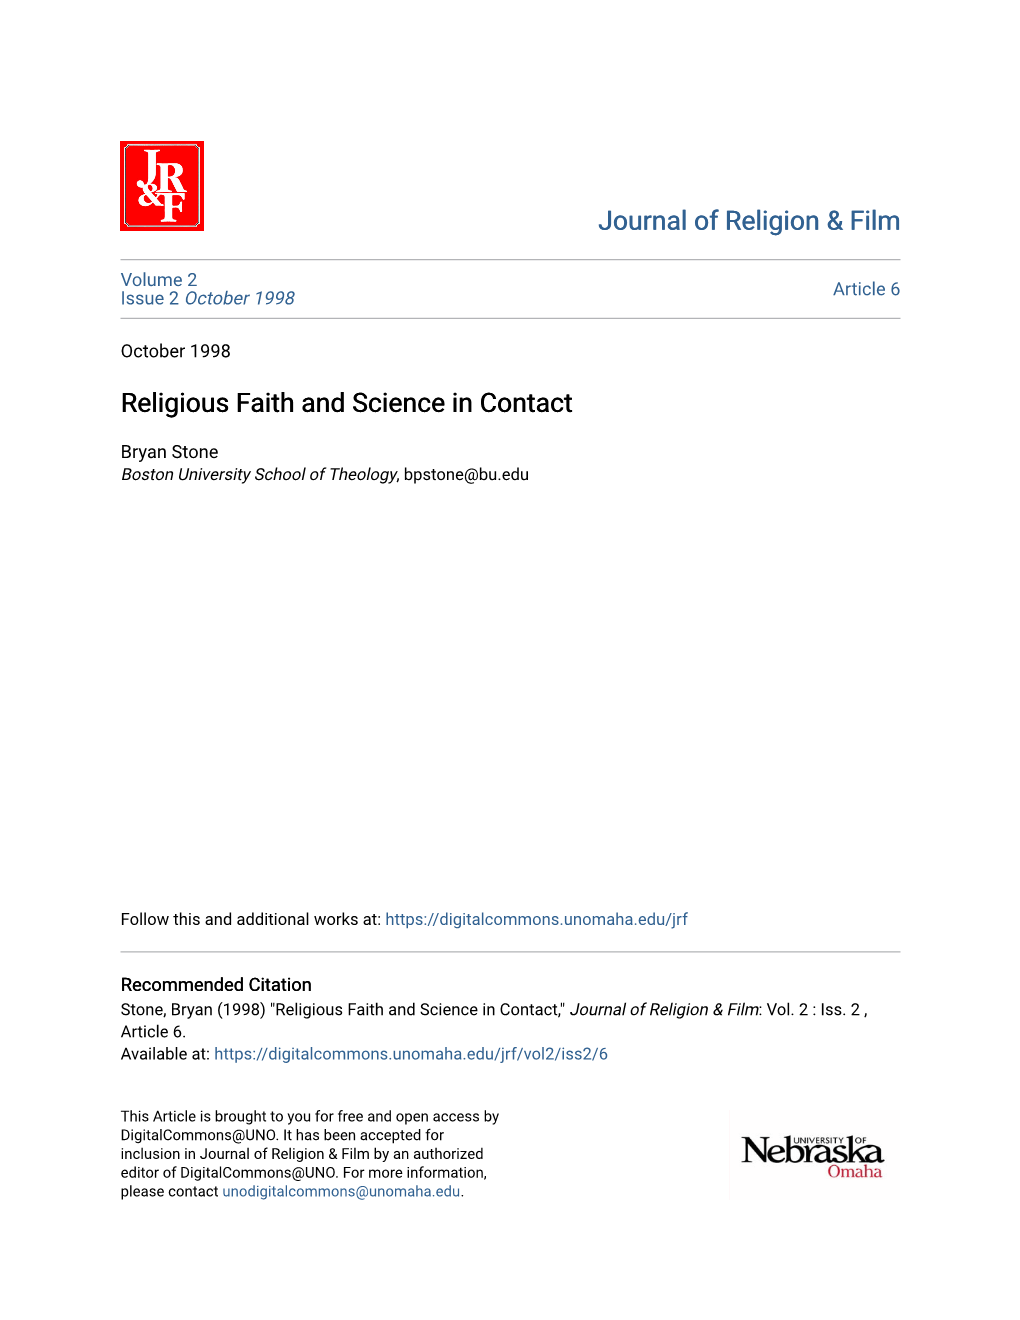 Religious Faith and Science in Contact